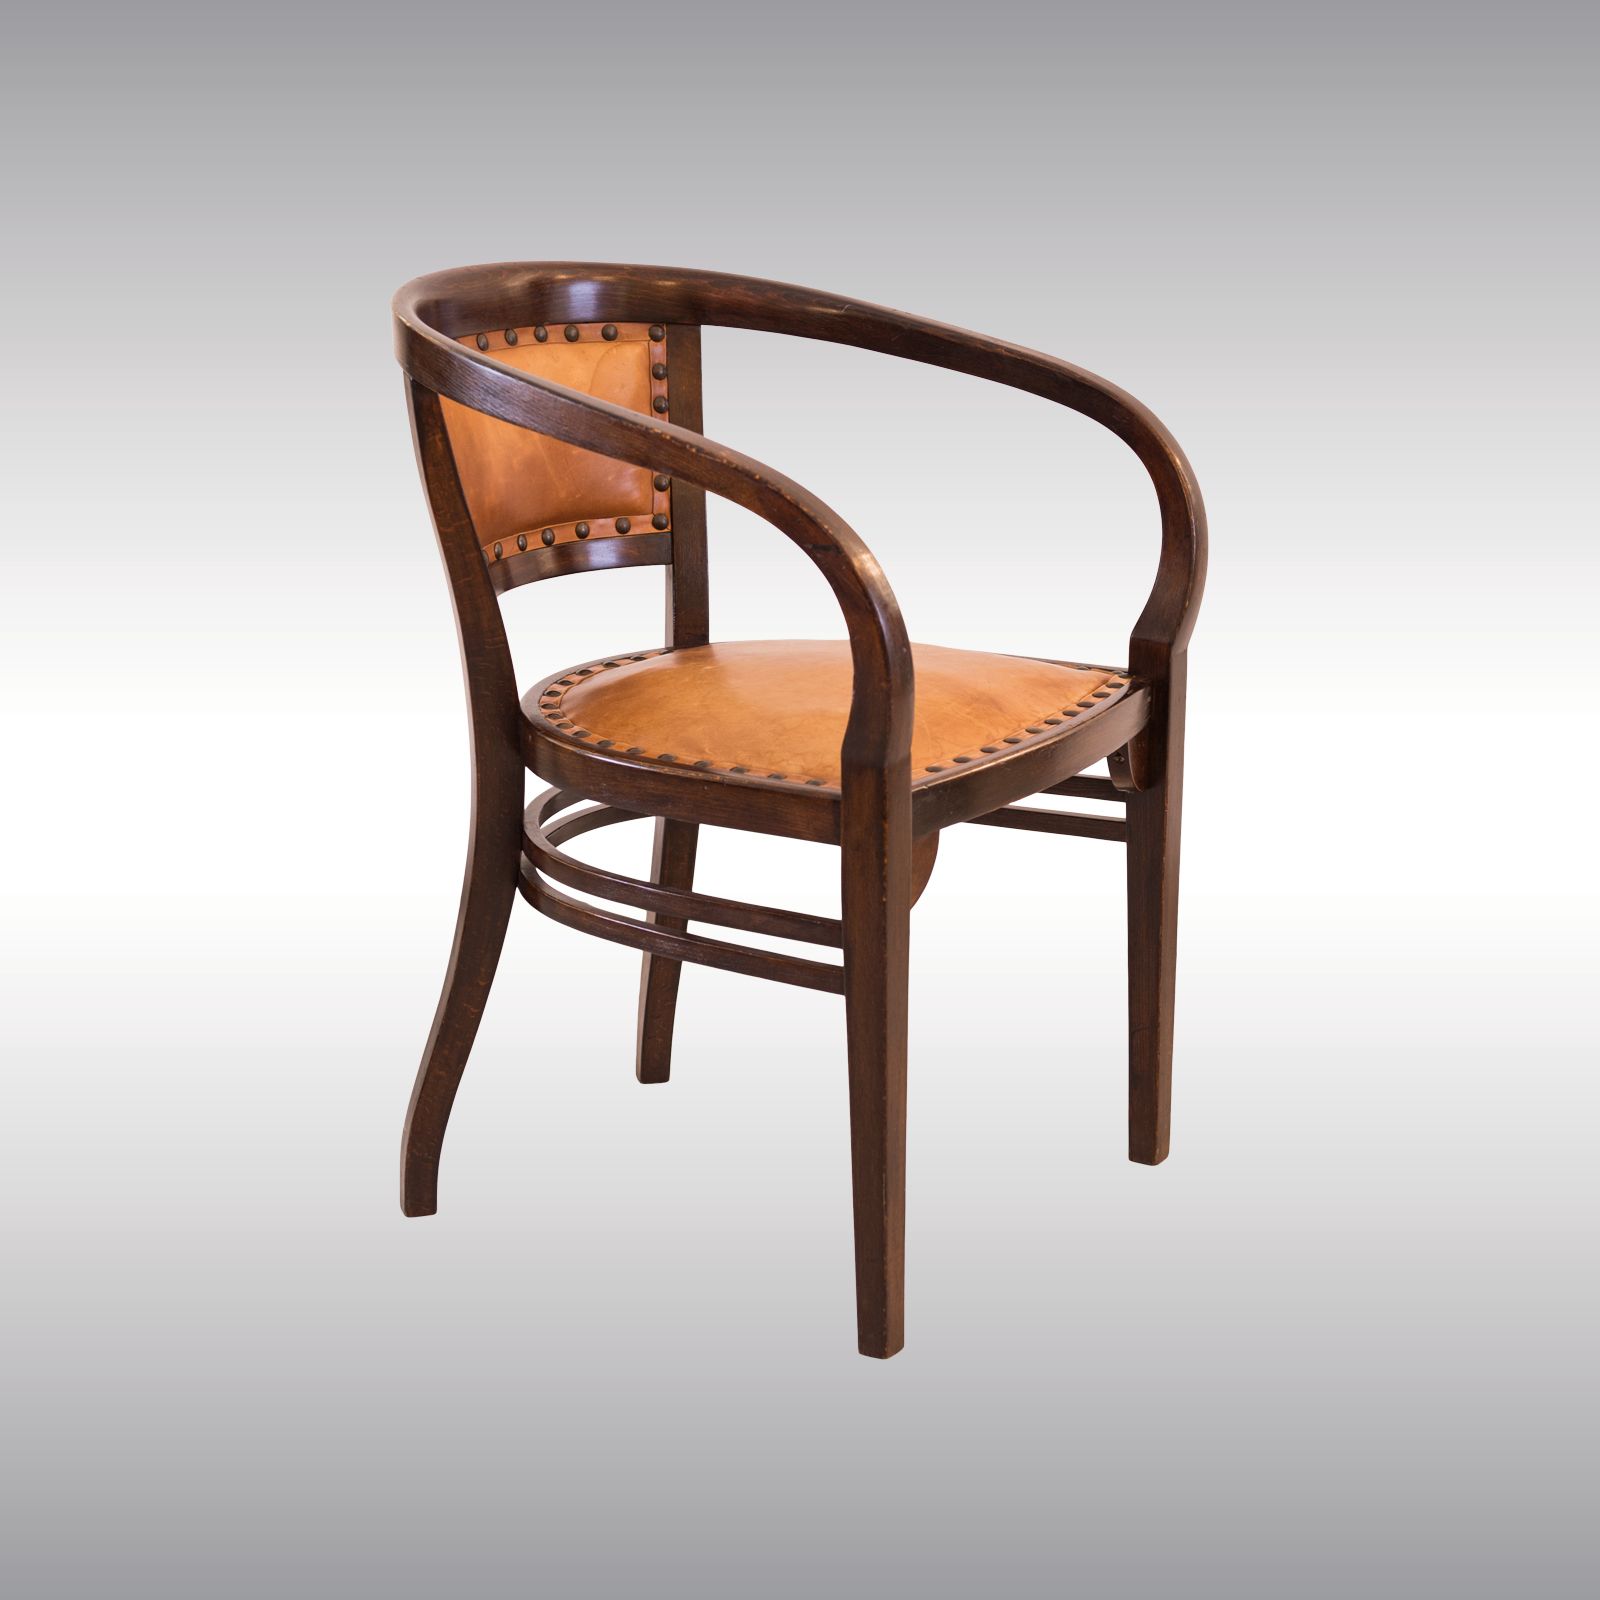 WOKA LAMPS VIENNA - OrderNr.:  80031|Extremely rare and beautiful Otto Wagner Chair by Thonet 1901